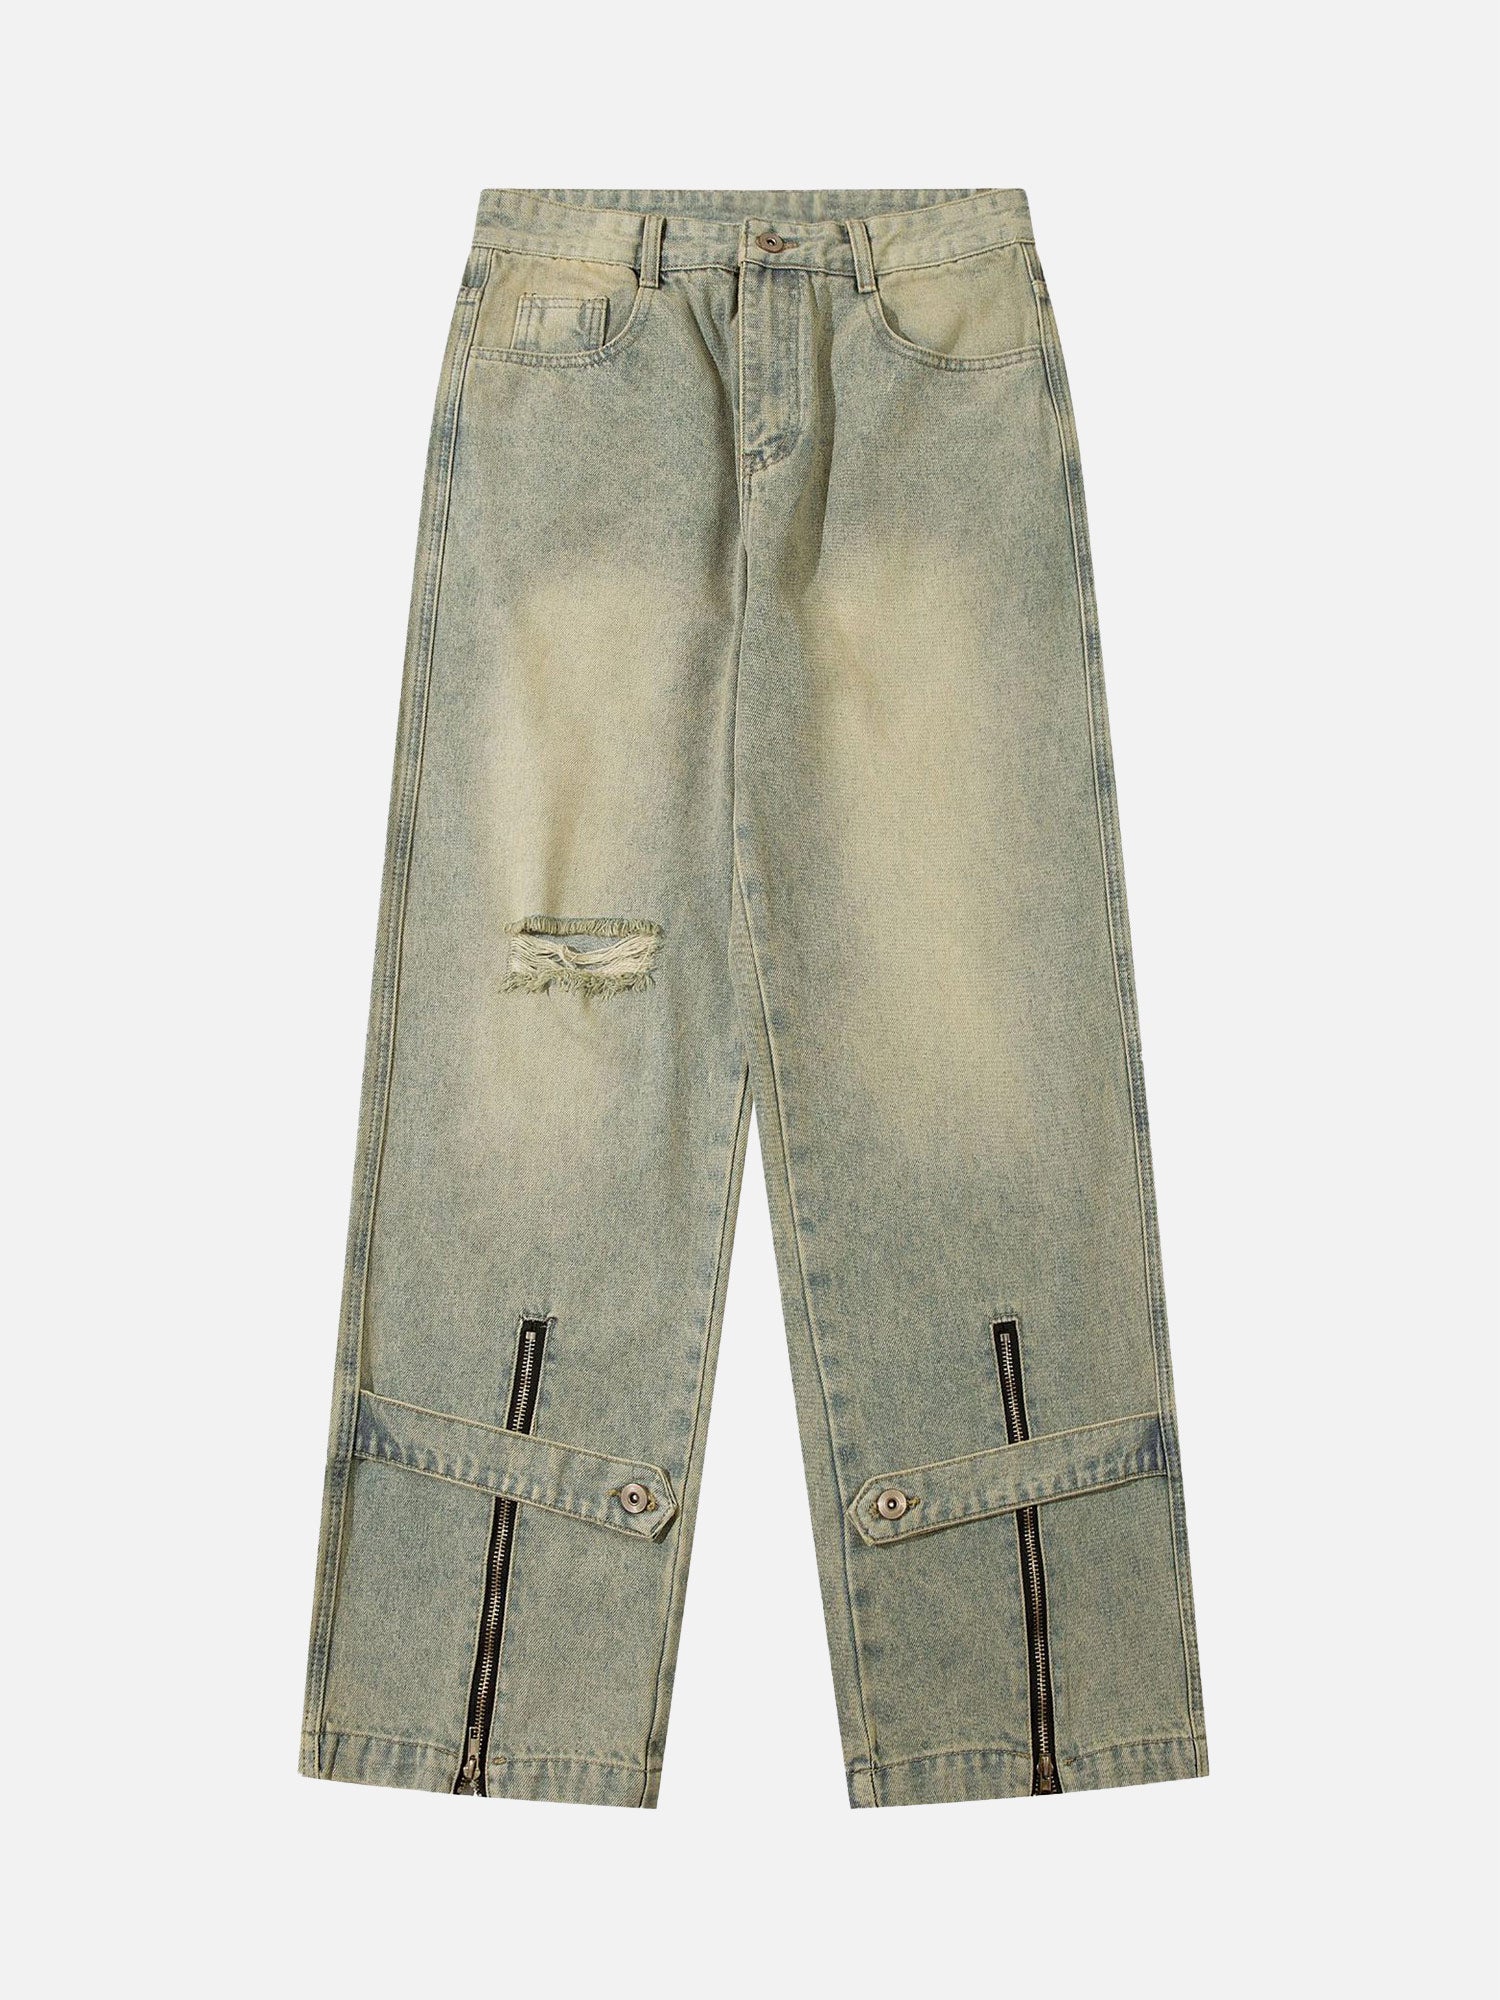 Thesupermade American Street Trend Zipper Design Washed Jeans